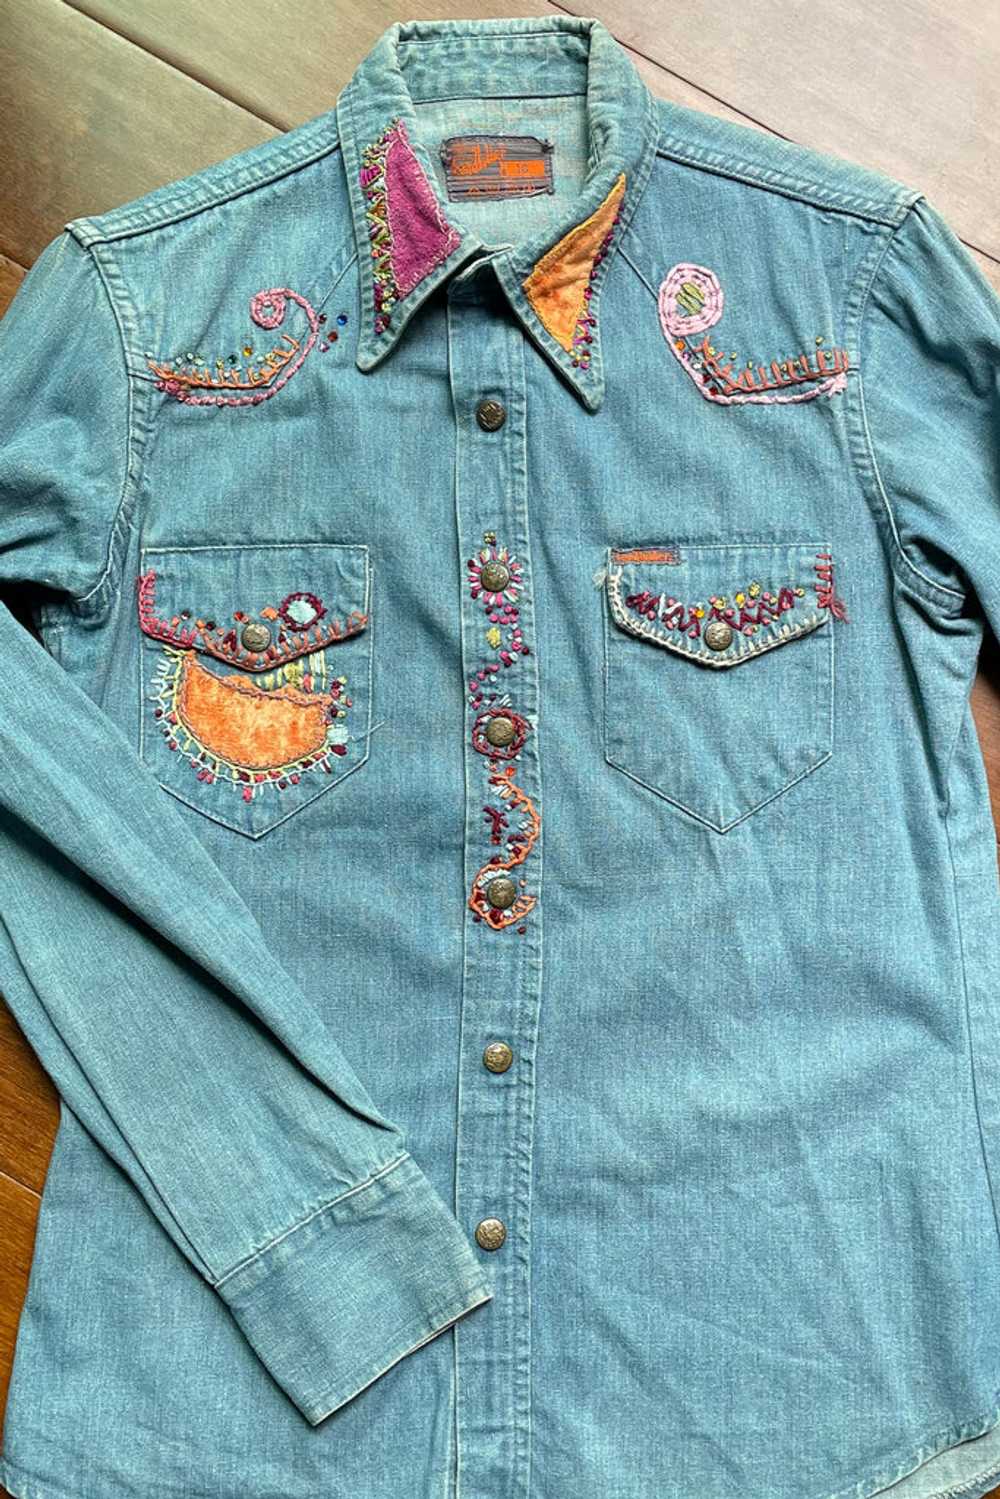 OOAK Vintage 60s70s Embroidered Patchwork Hippie … - image 1